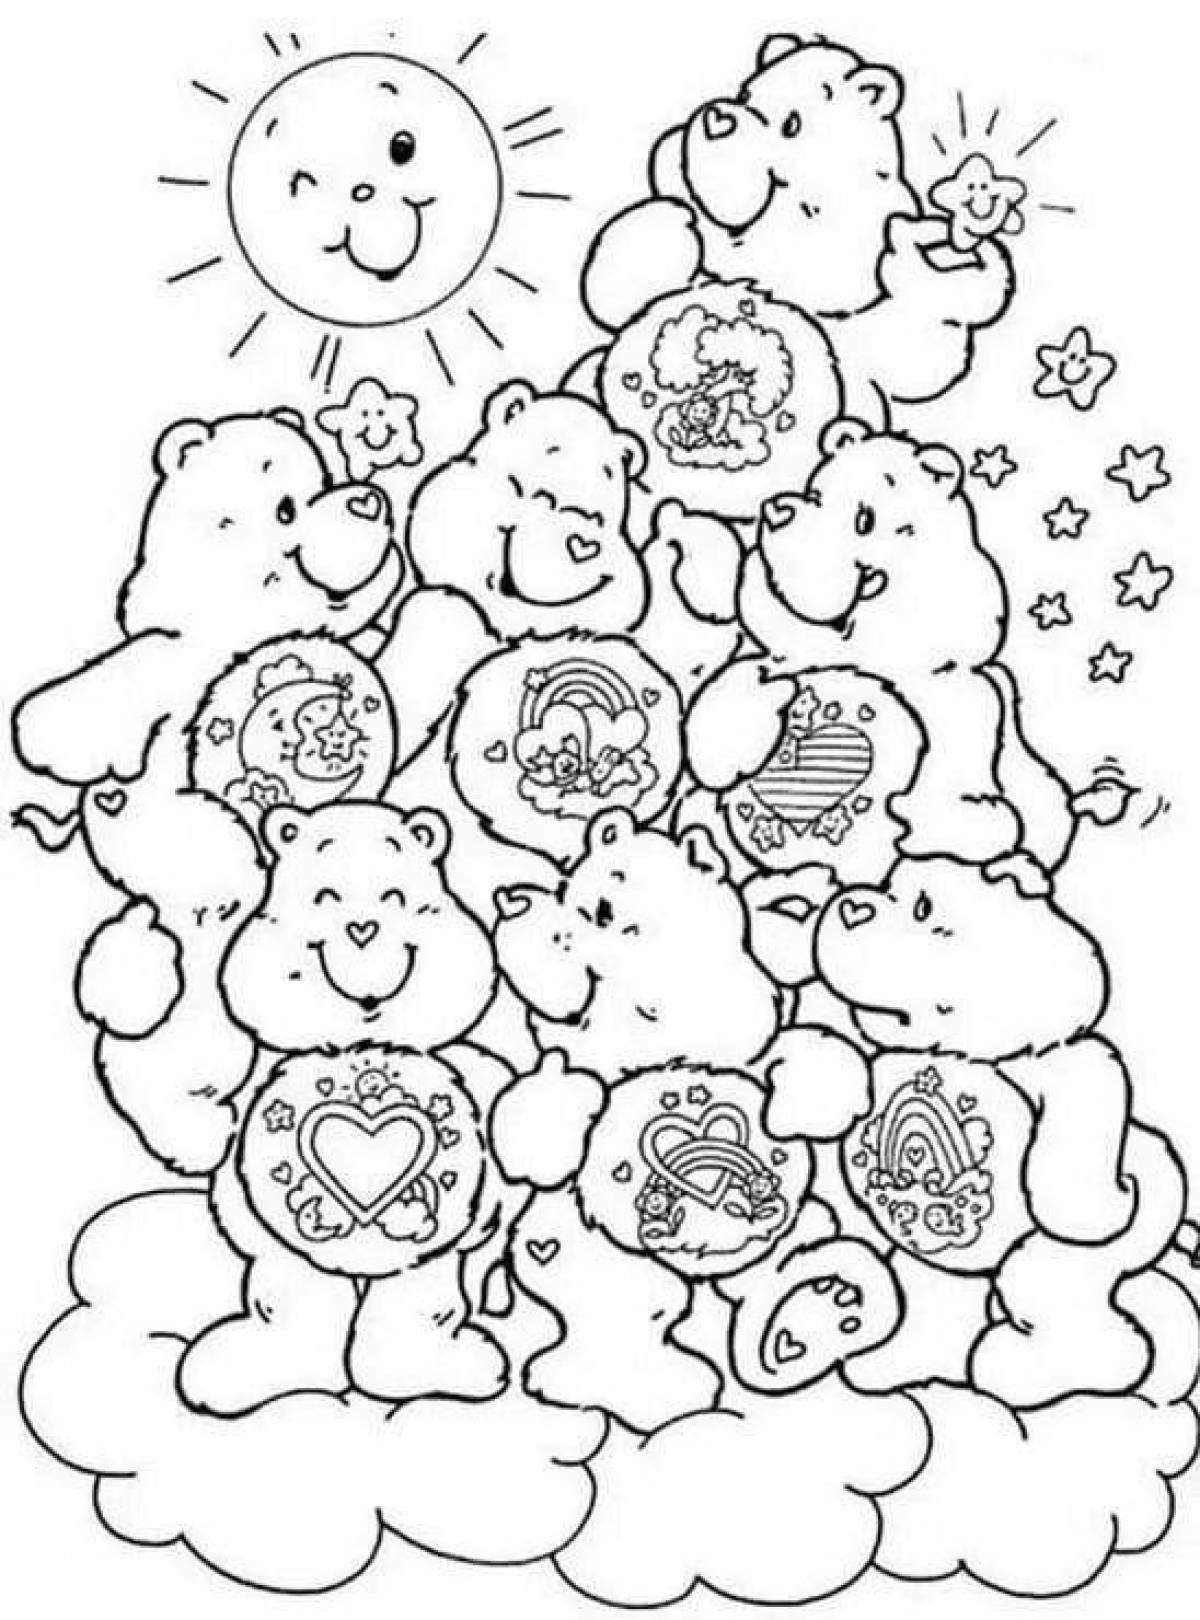 Exciting care bear coloring pages